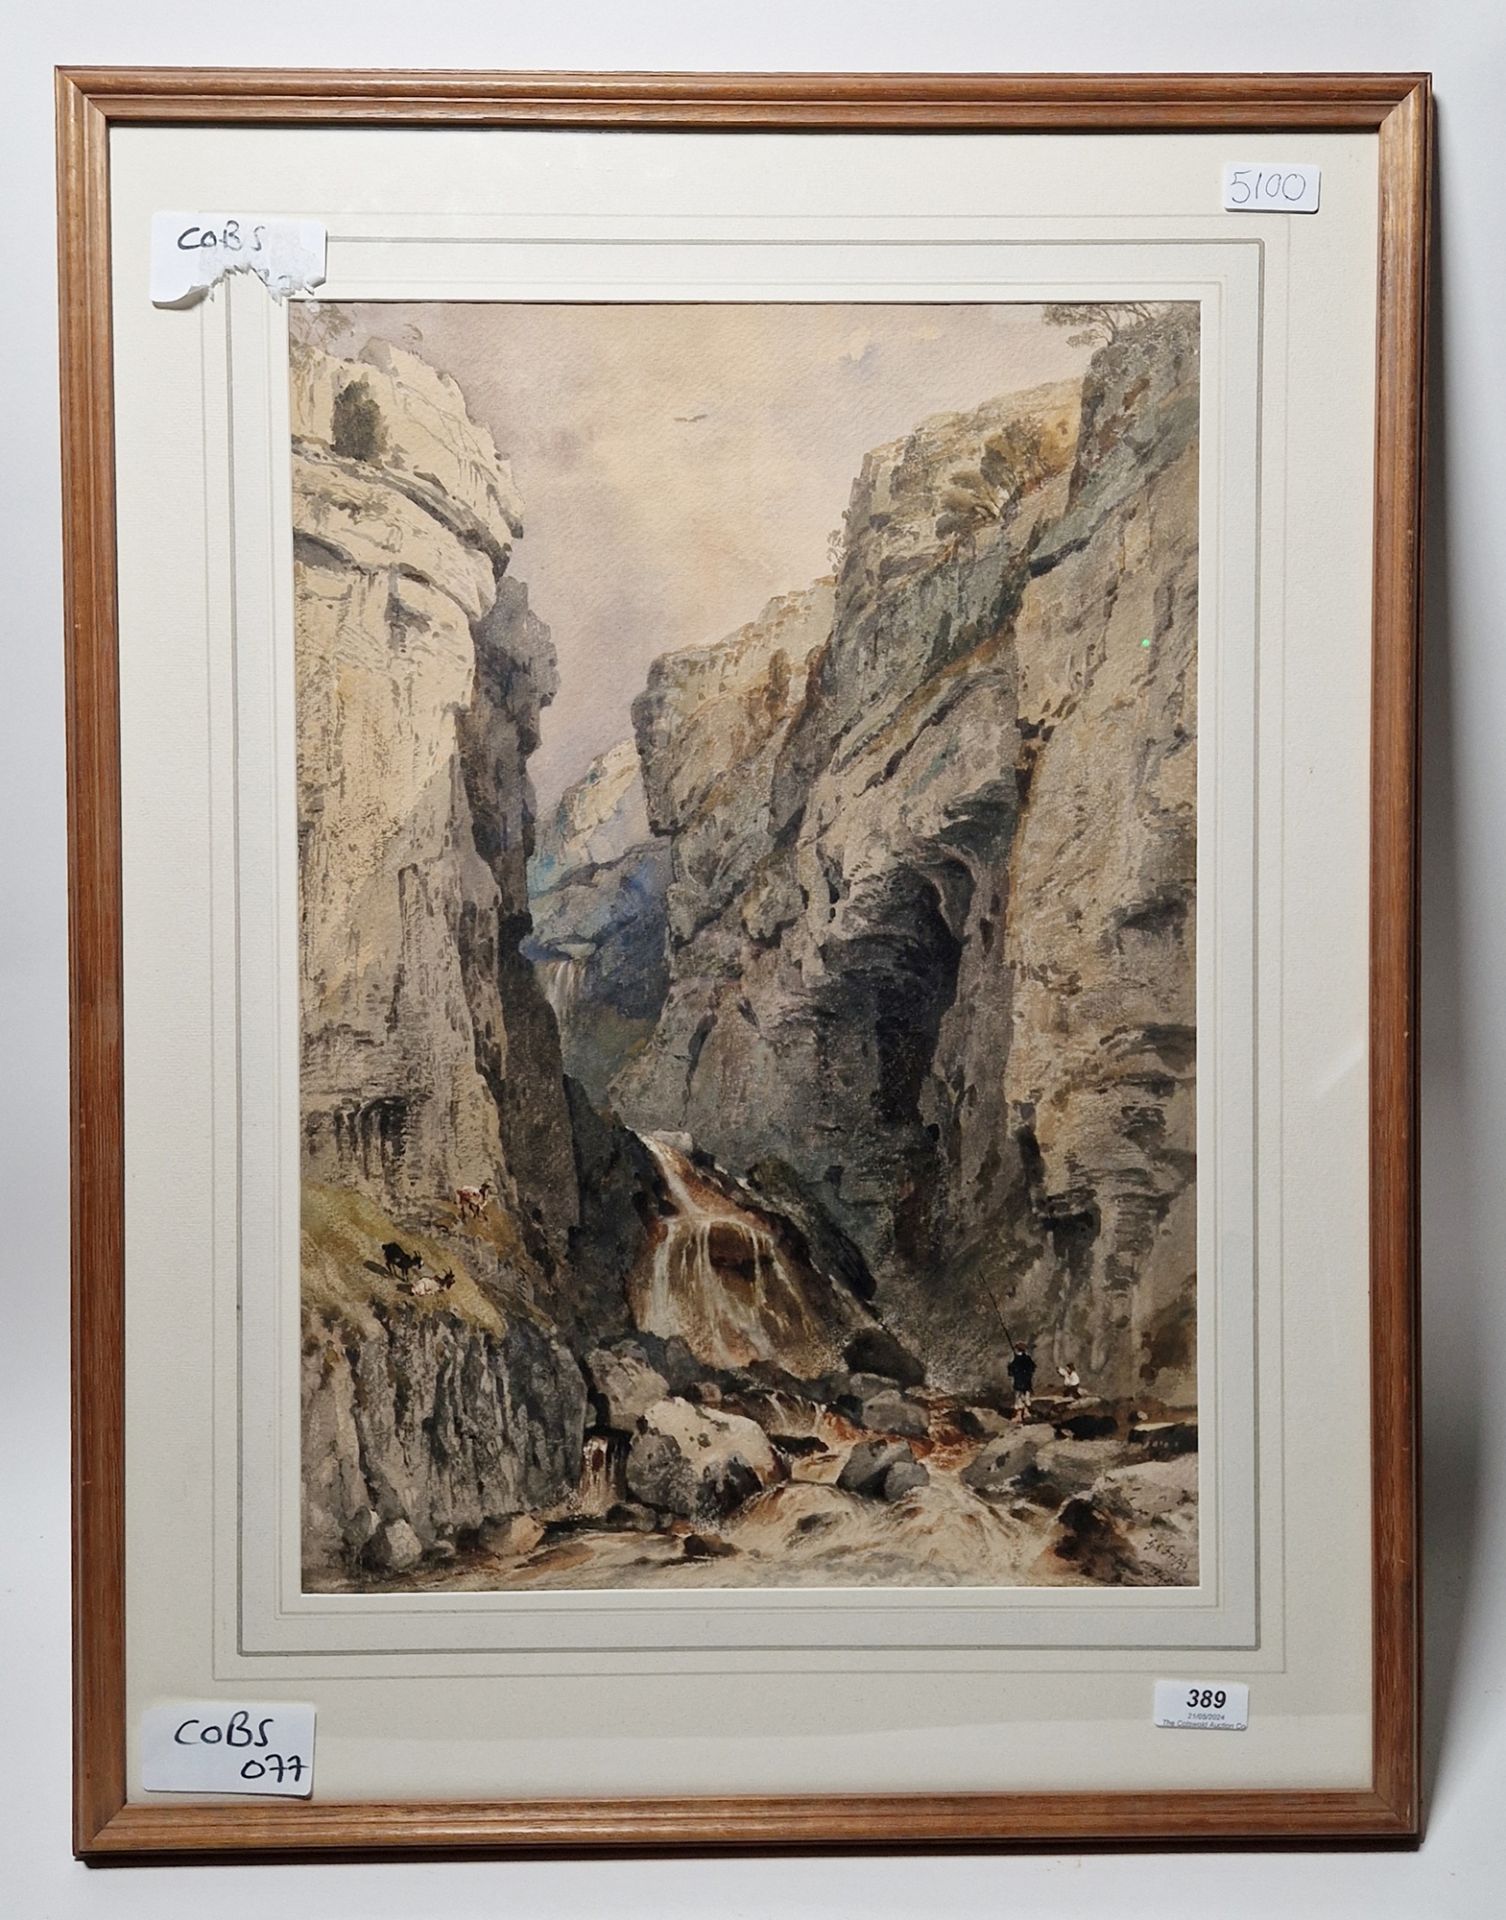 George Arthur Fripp RWS (1813-1896) Watercolour Men fishing in a rocky gorge with mountain goats - Image 2 of 3